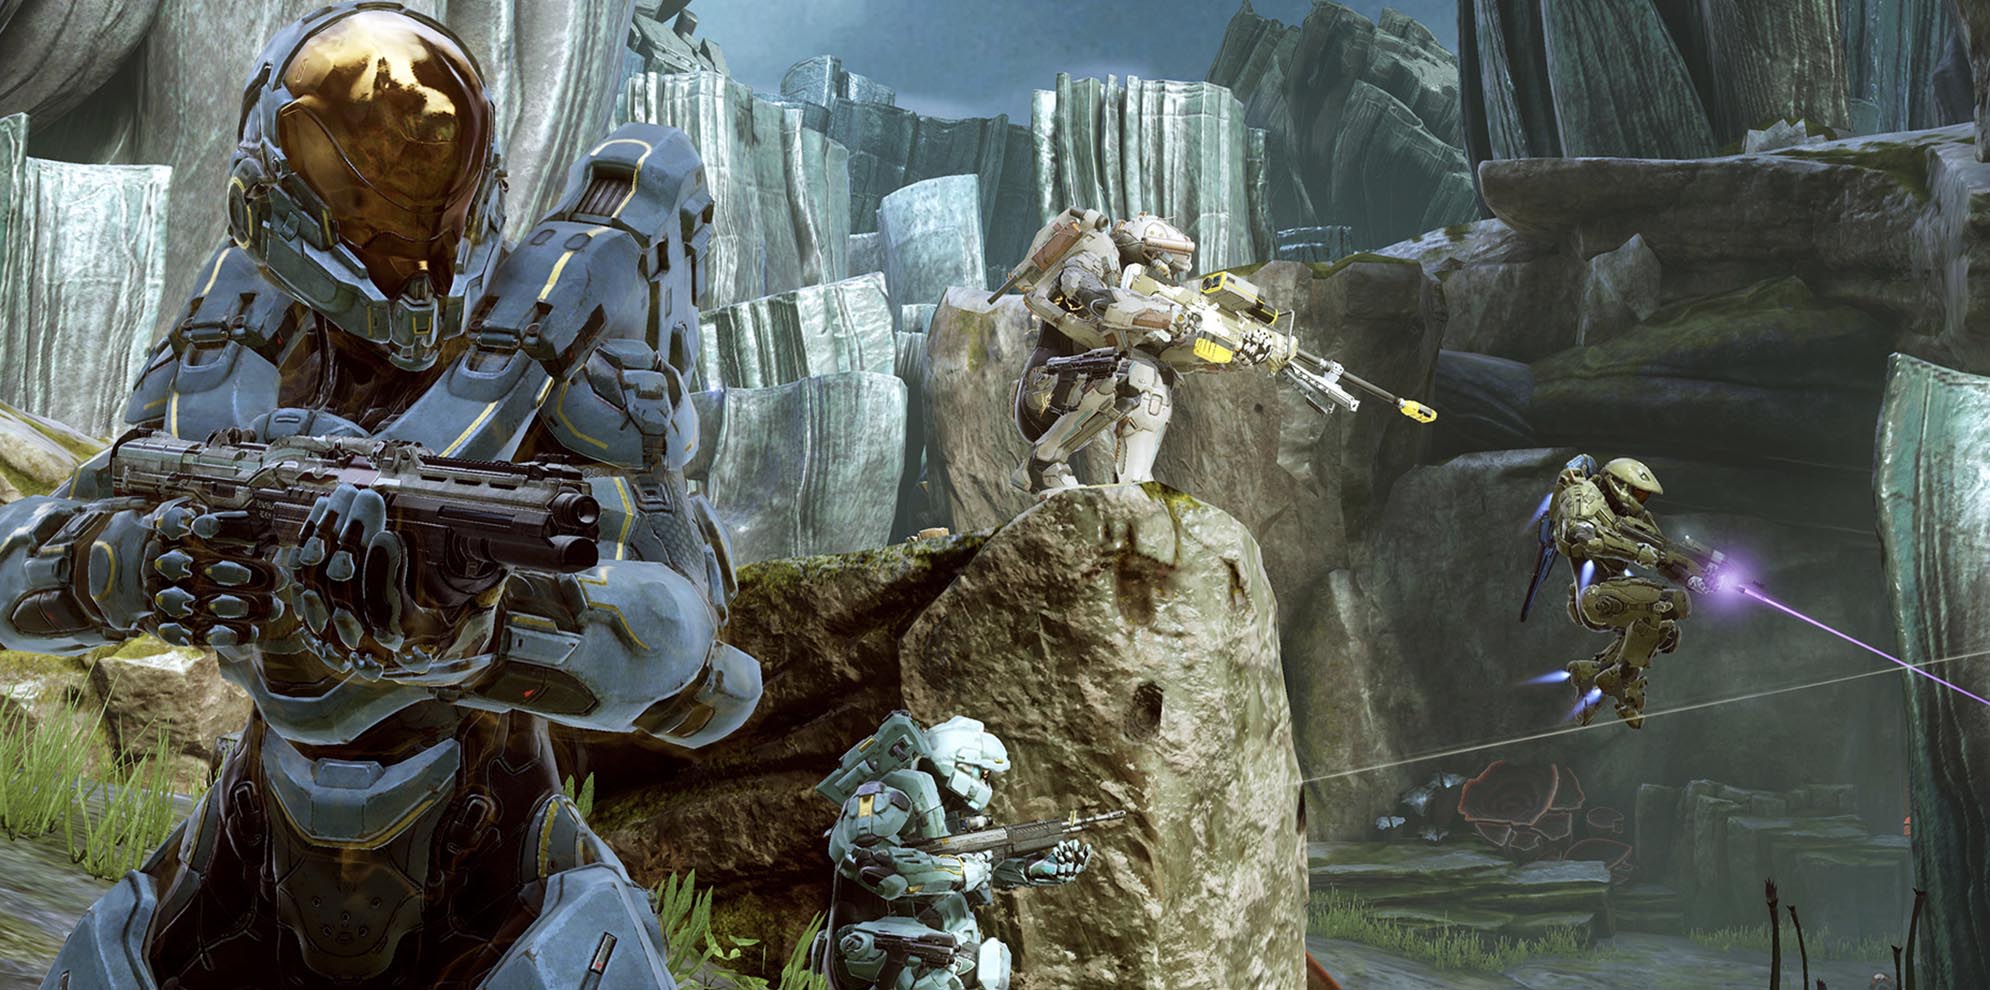 Halo 5: Guardians' returns to what made 'Halo' great